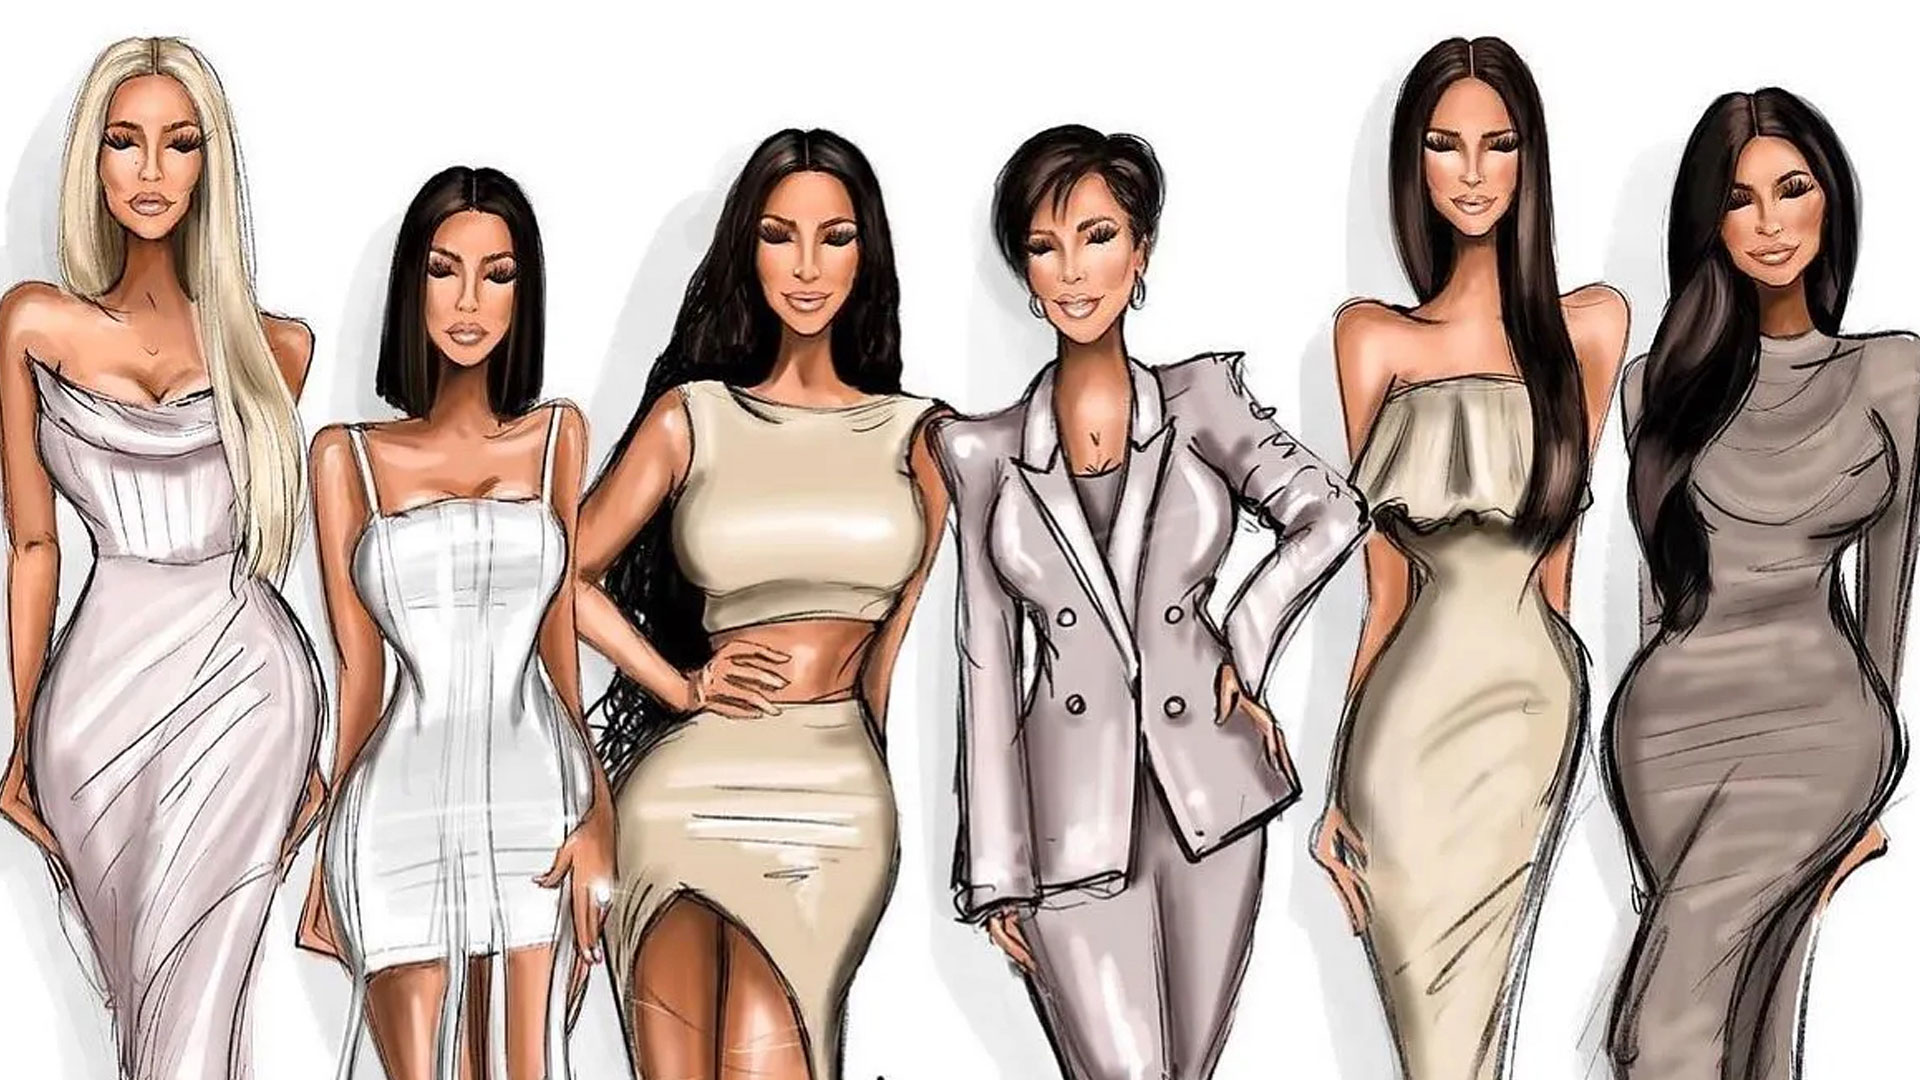 Kris, Kylie & Khloe respond to 'unflattering' court sketches with new art